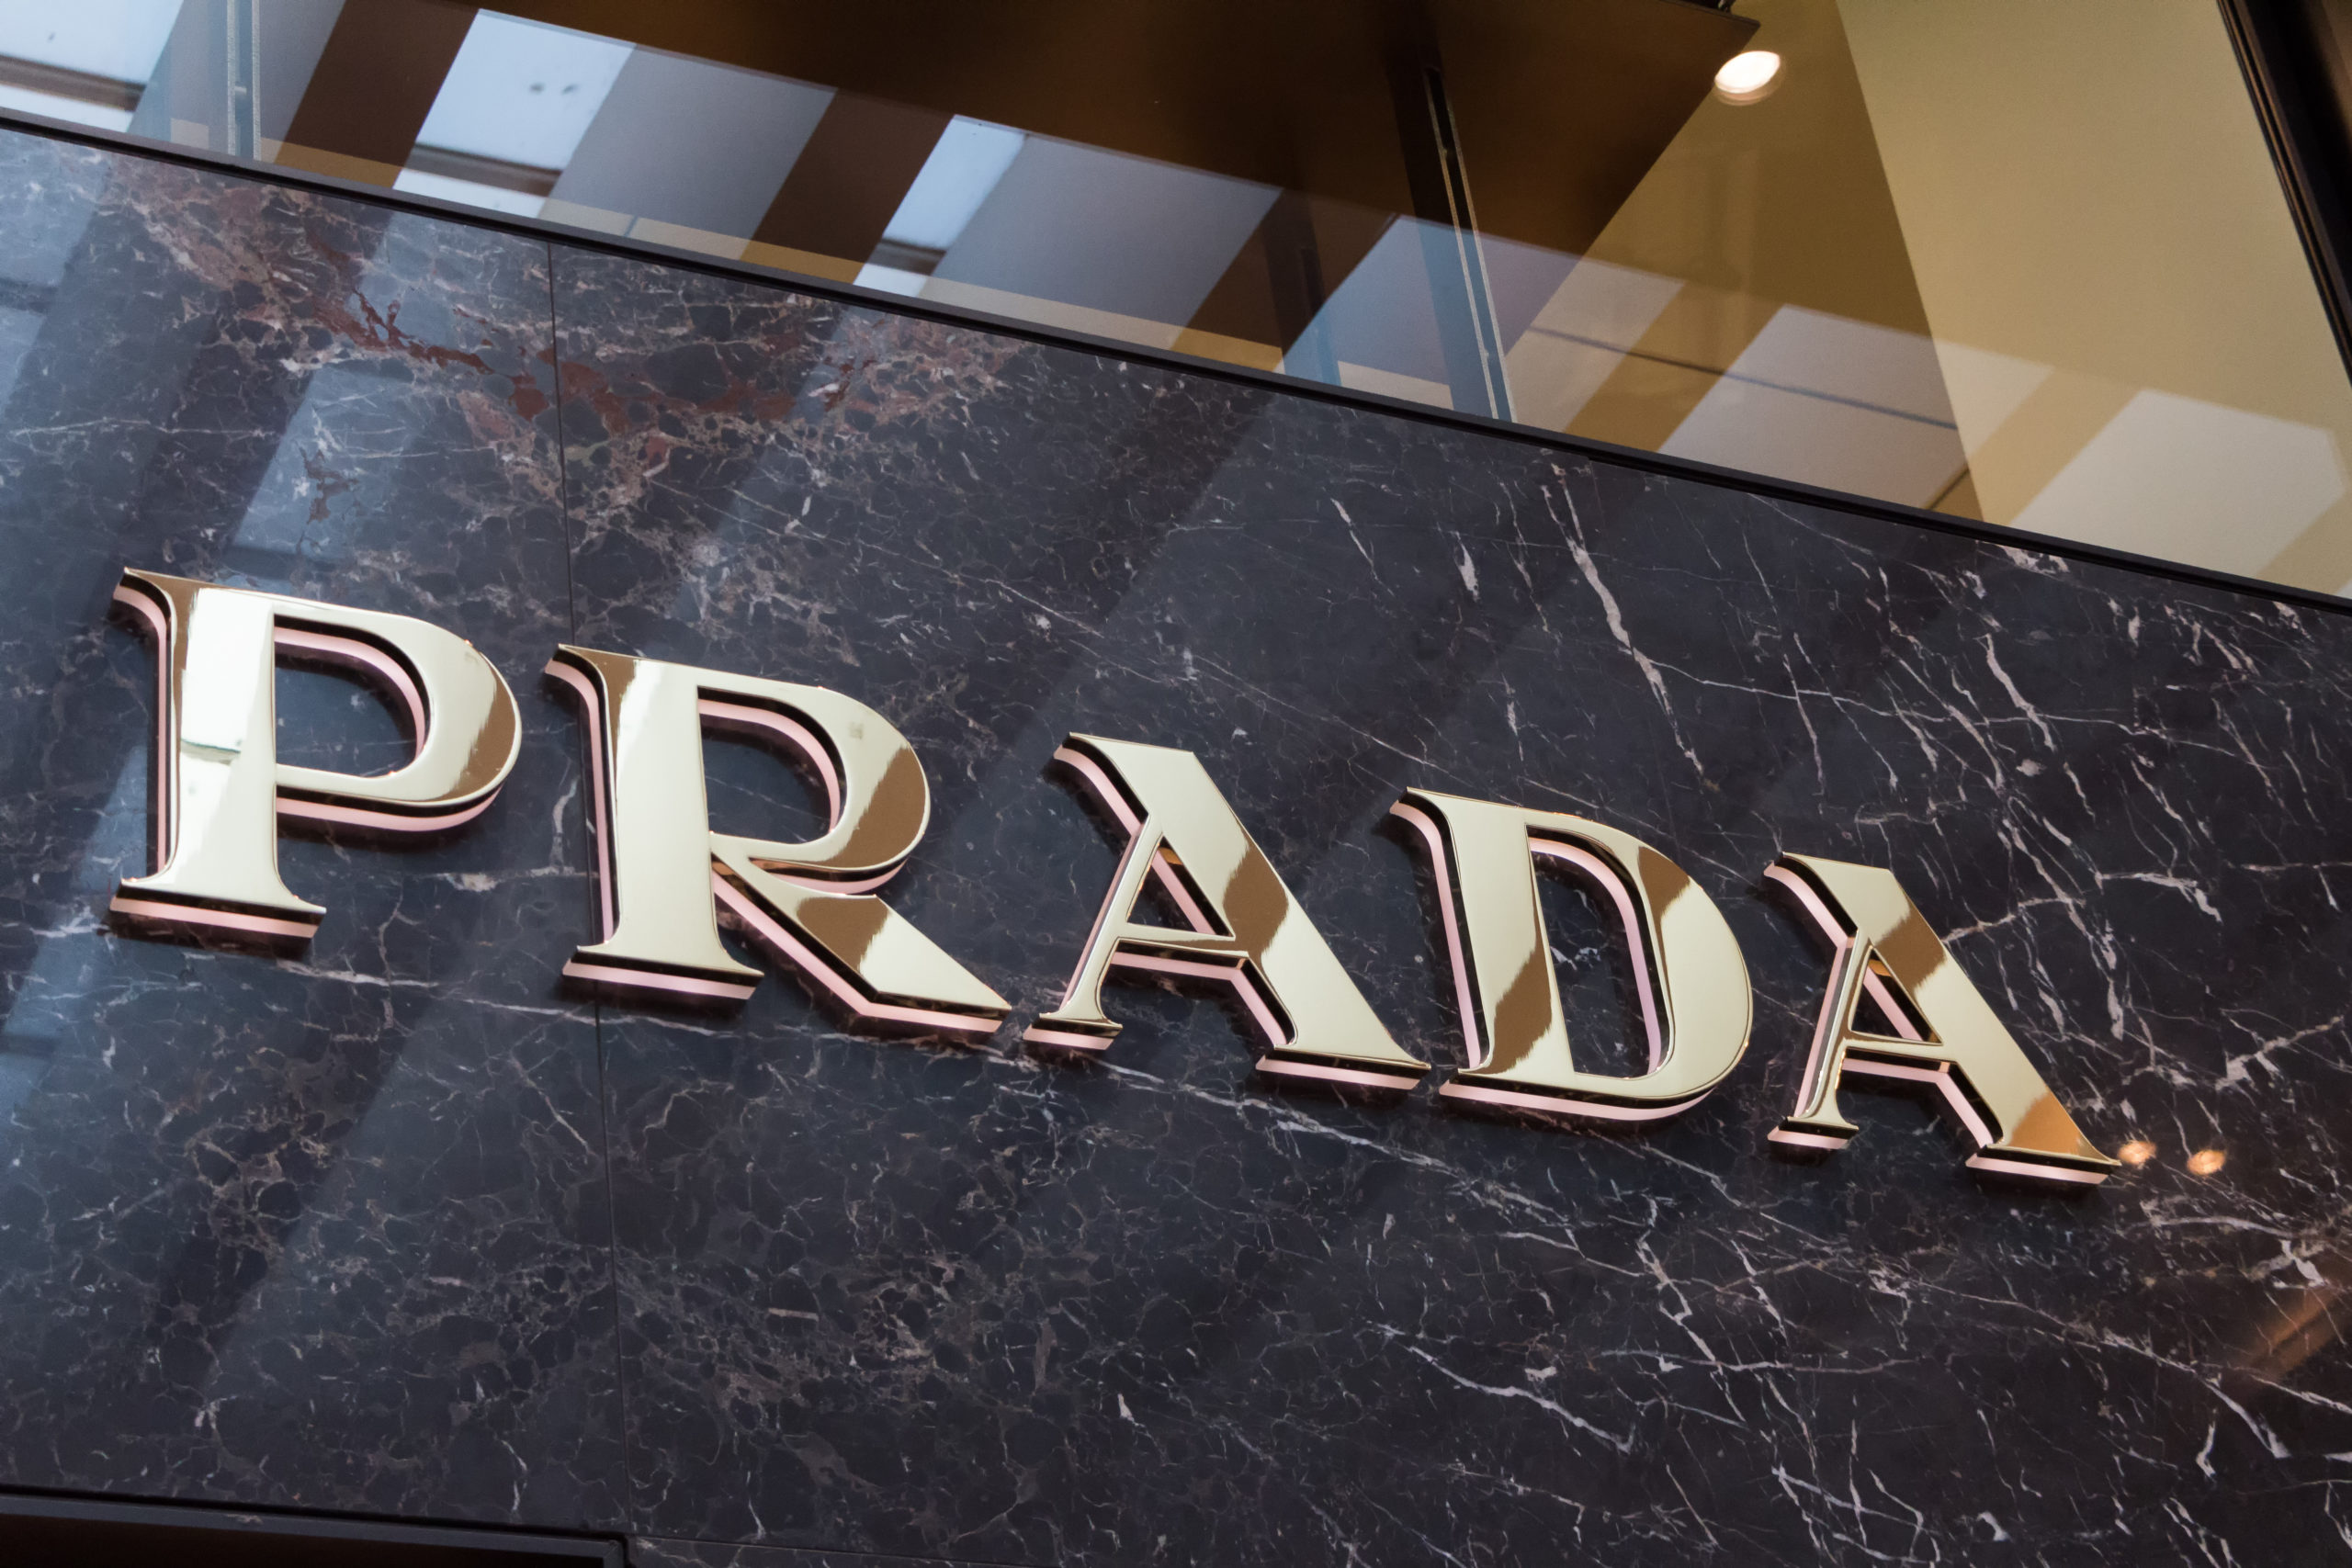 Prada Joining Top Luxury Brands in Web3 With Ethereum NFTs